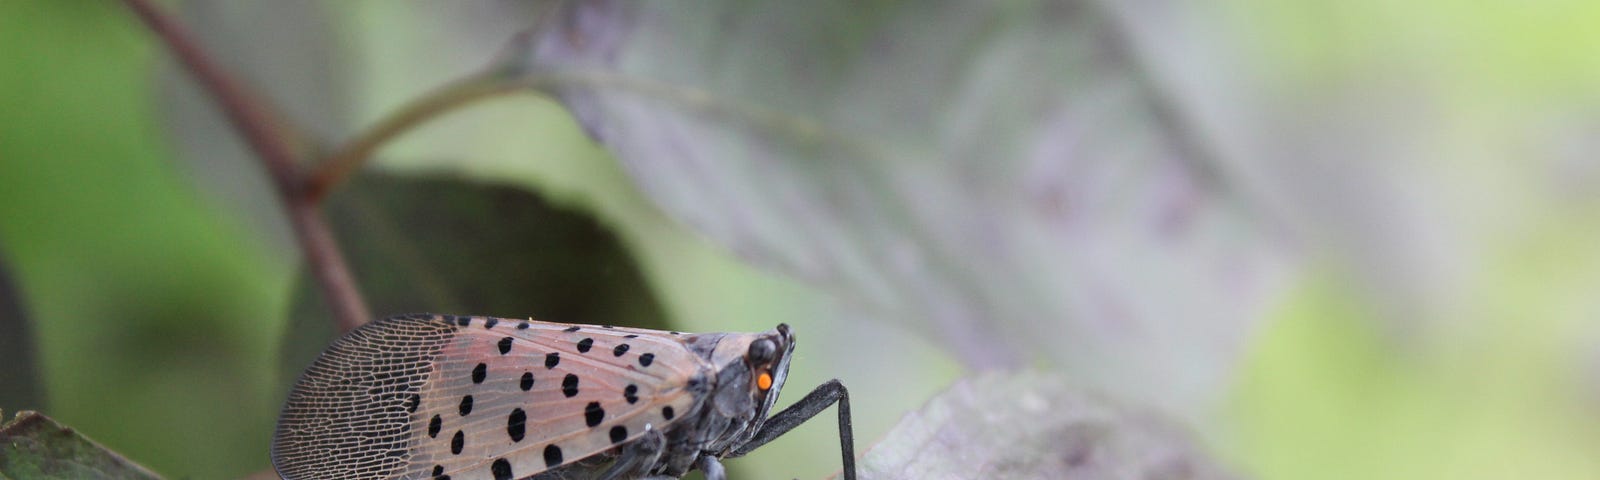 Adult spotted lanternfly, a black and gray insect, on a leaf. Photo by Magi Kern on Unsplash